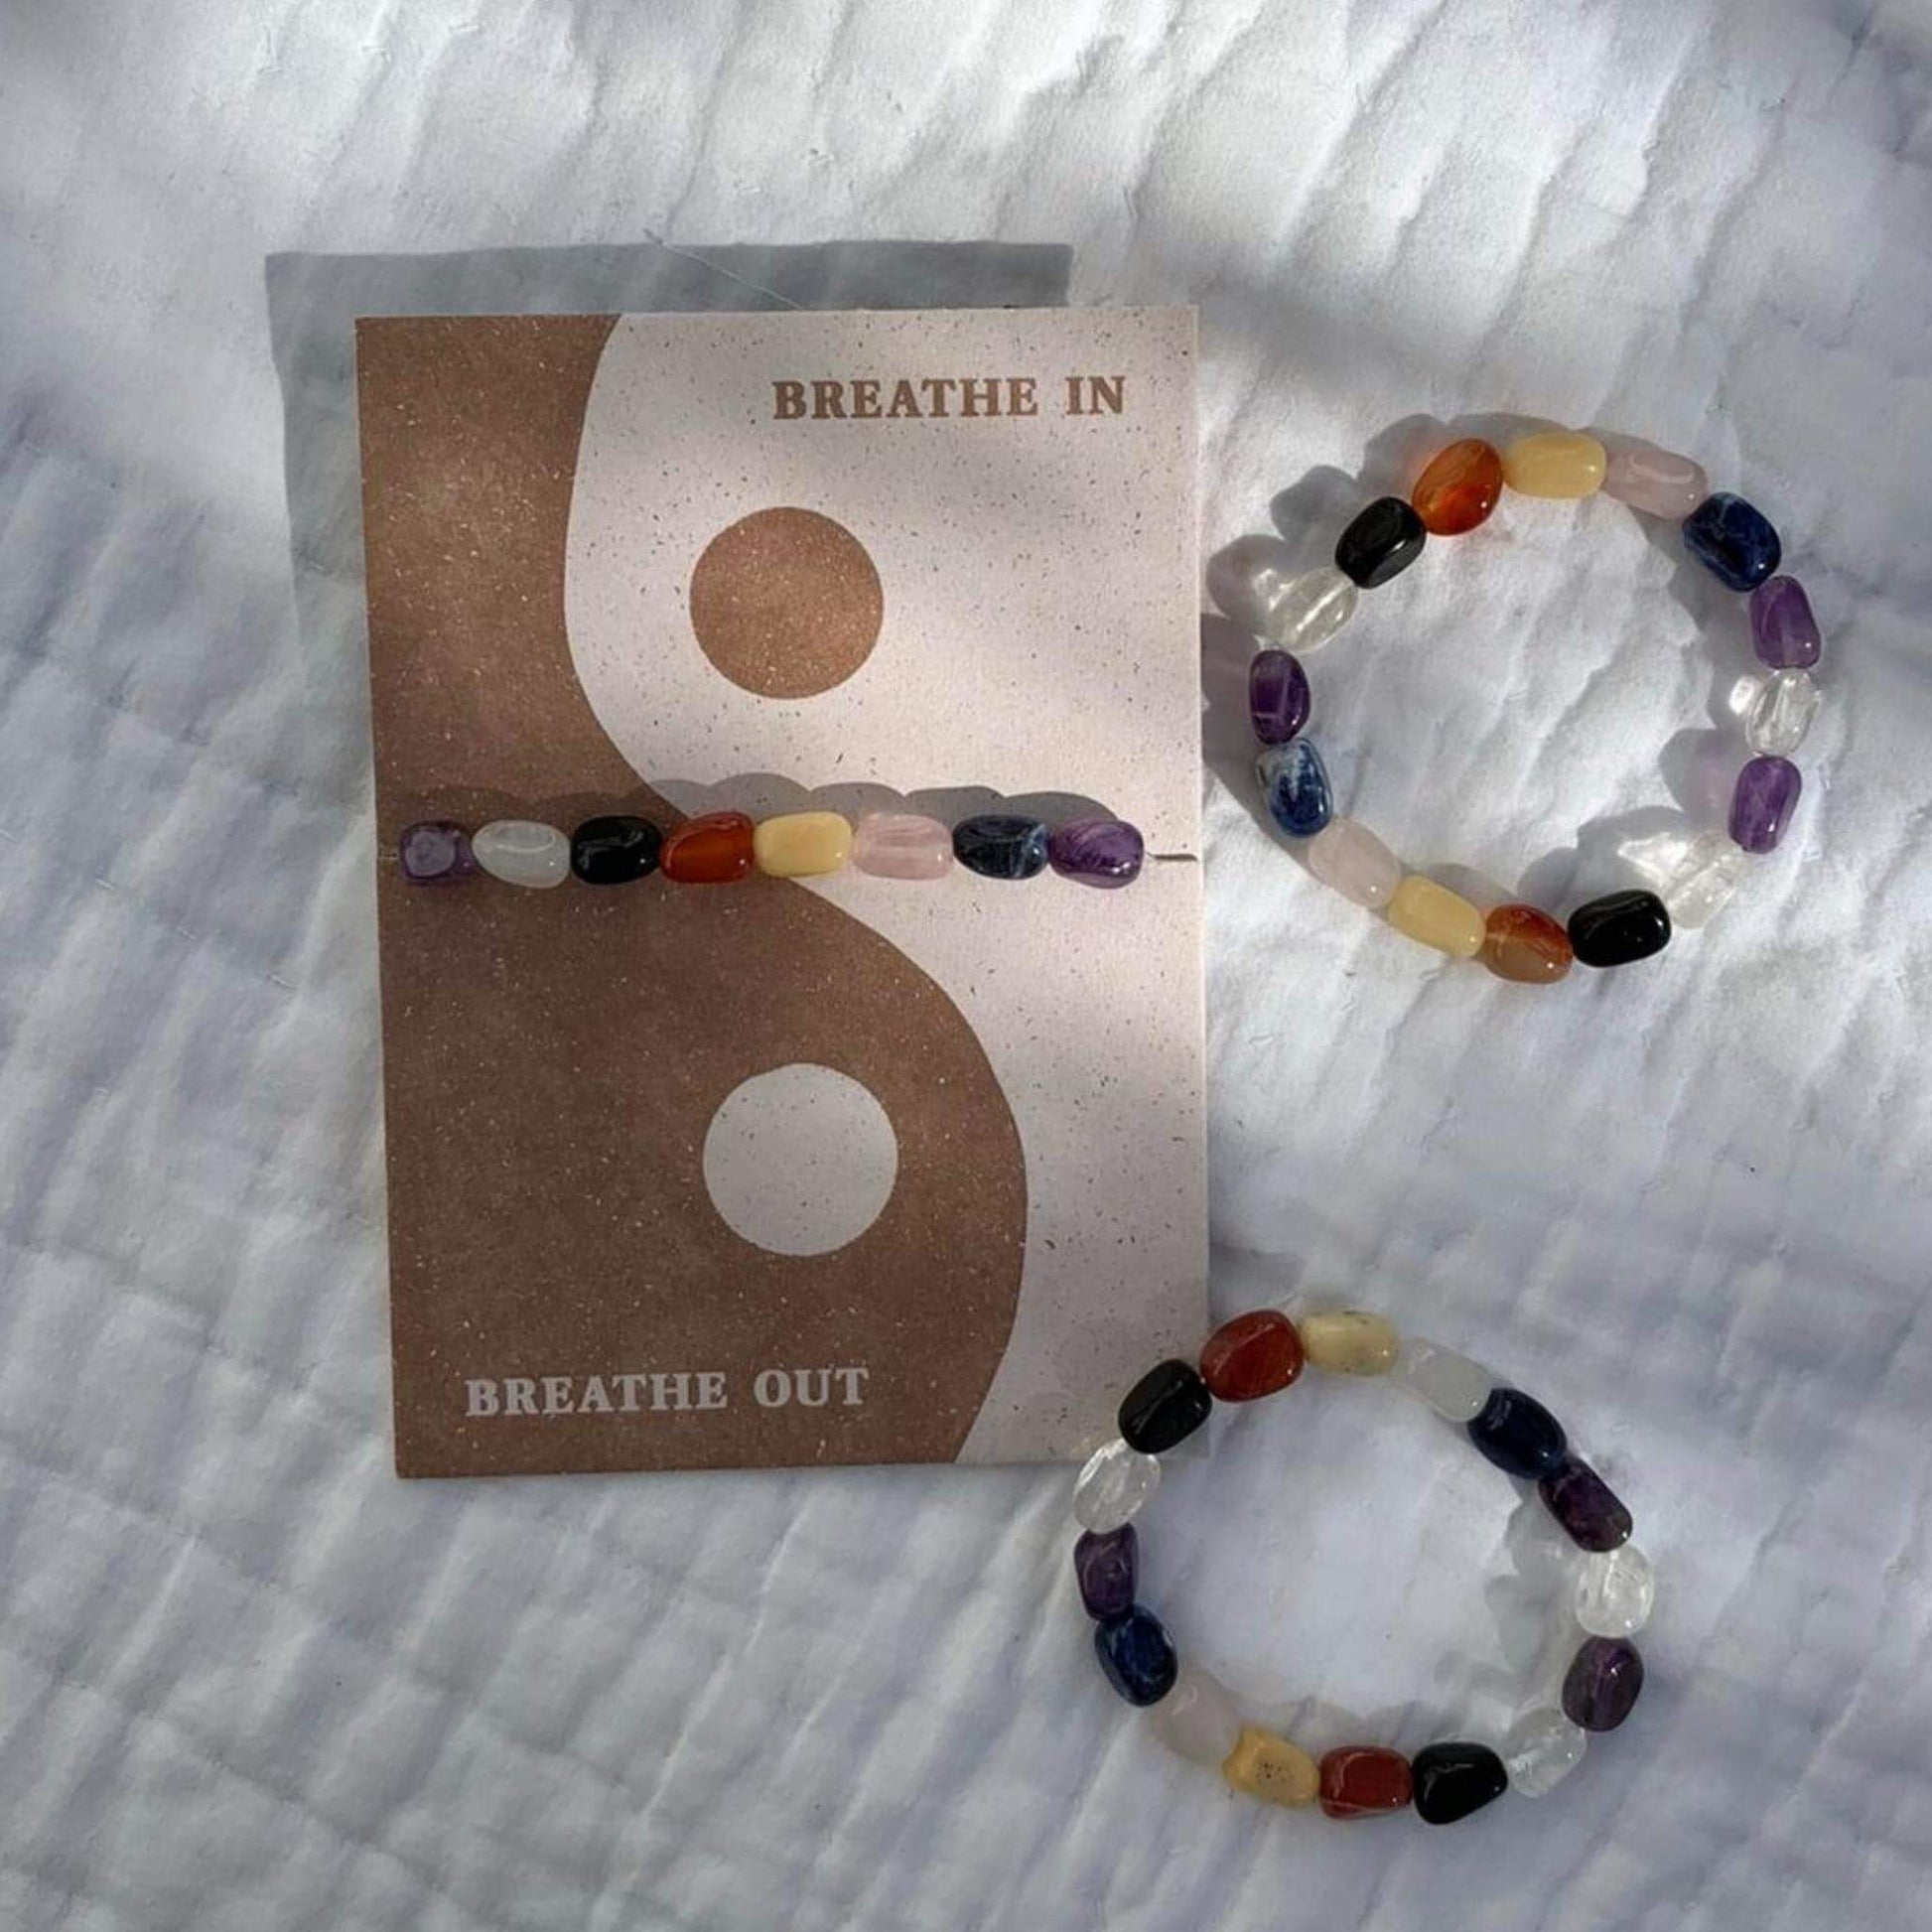 Chakra thumbled stone Bracelet Card - Breathe in Breath out - Unik by Nature